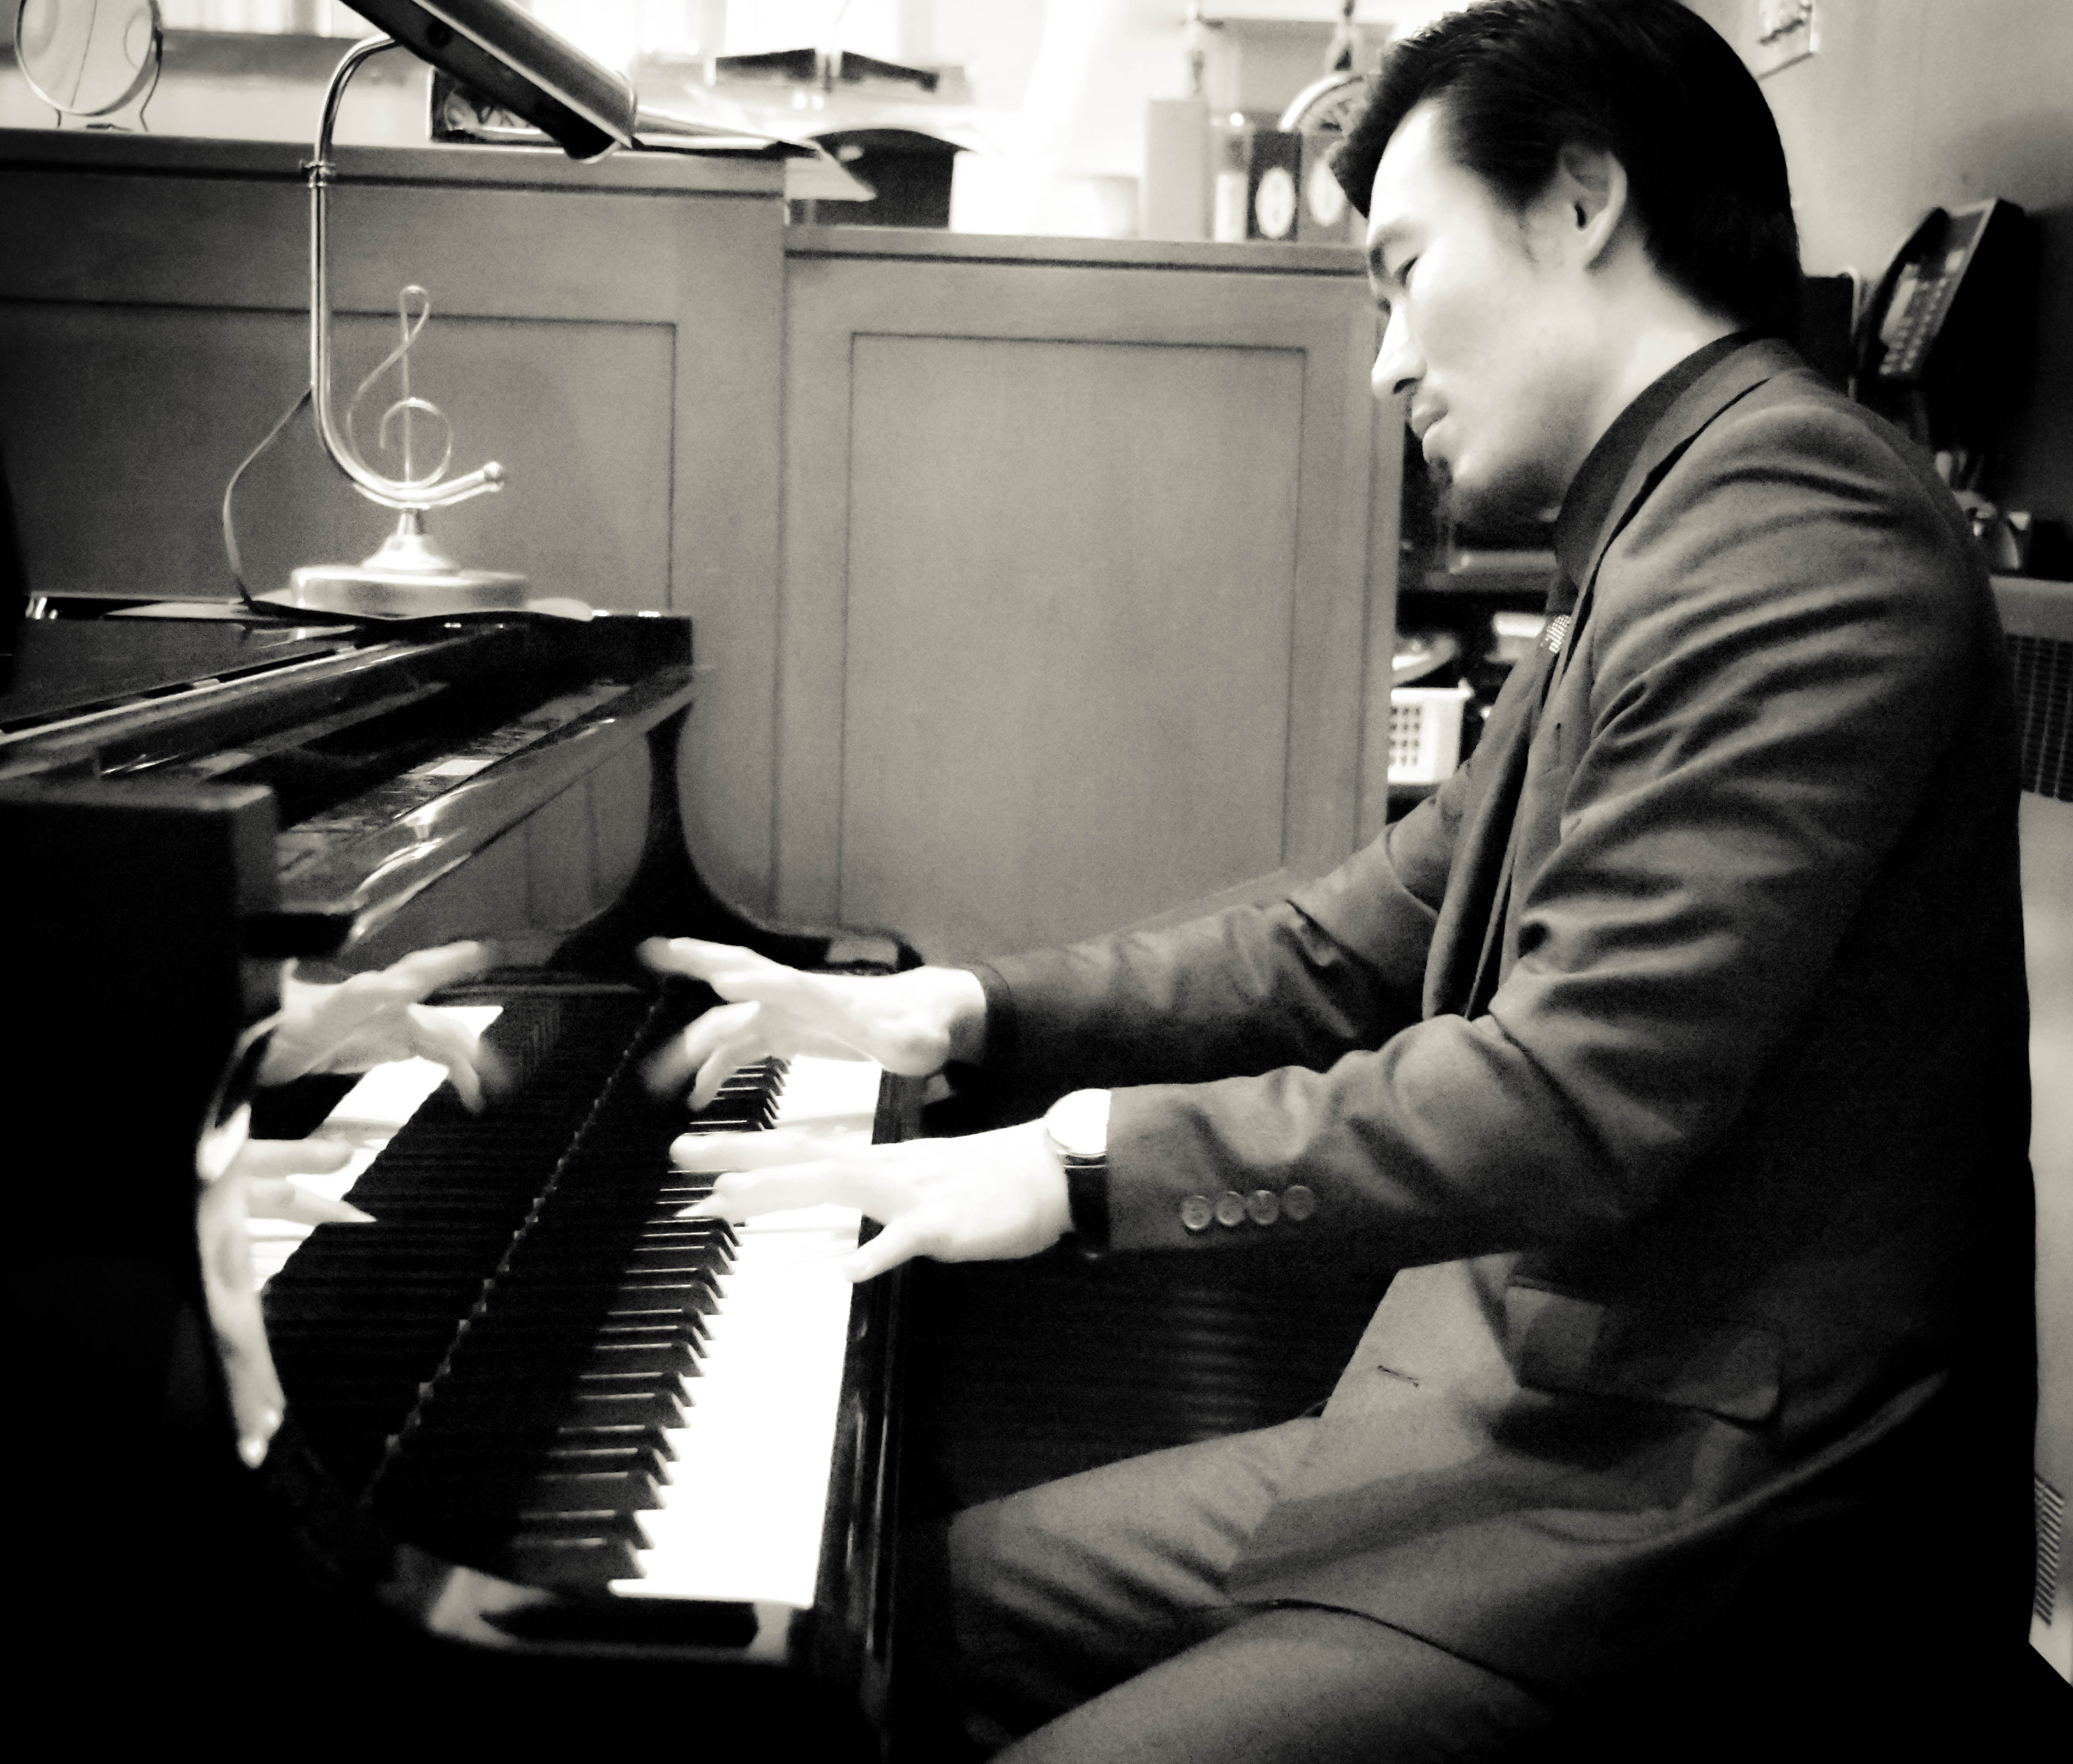 A profile shot of Sebastian playing the piano in black and white